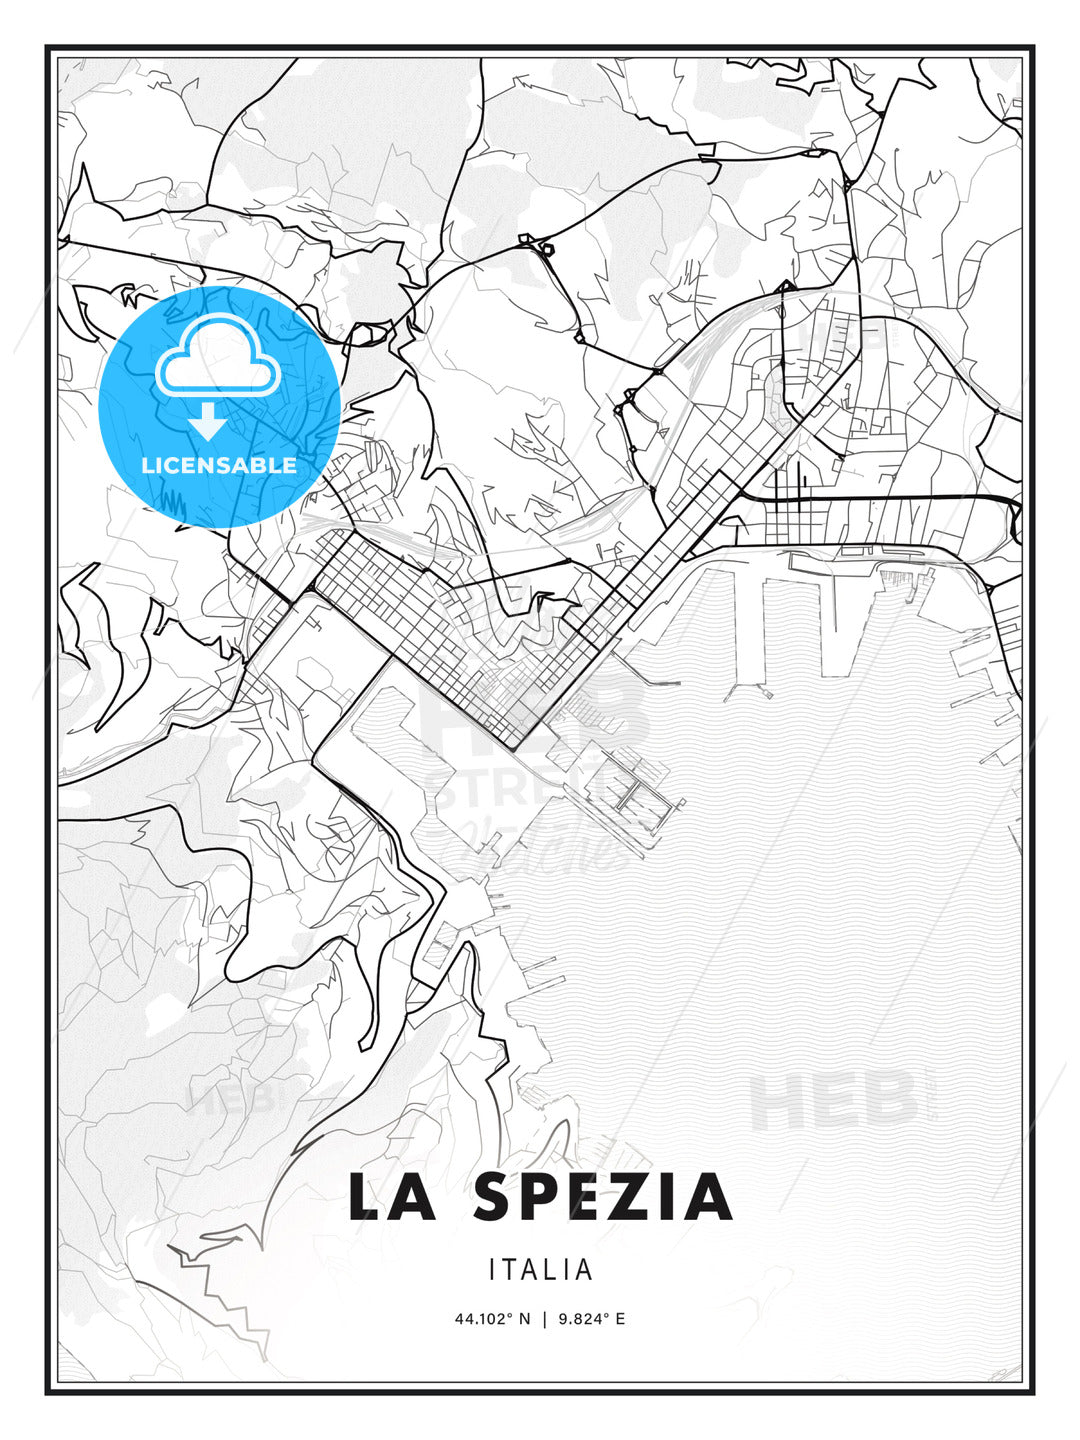 La Spezia, Italy, Modern Print Template in Various Formats - HEBSTREITS Sketches